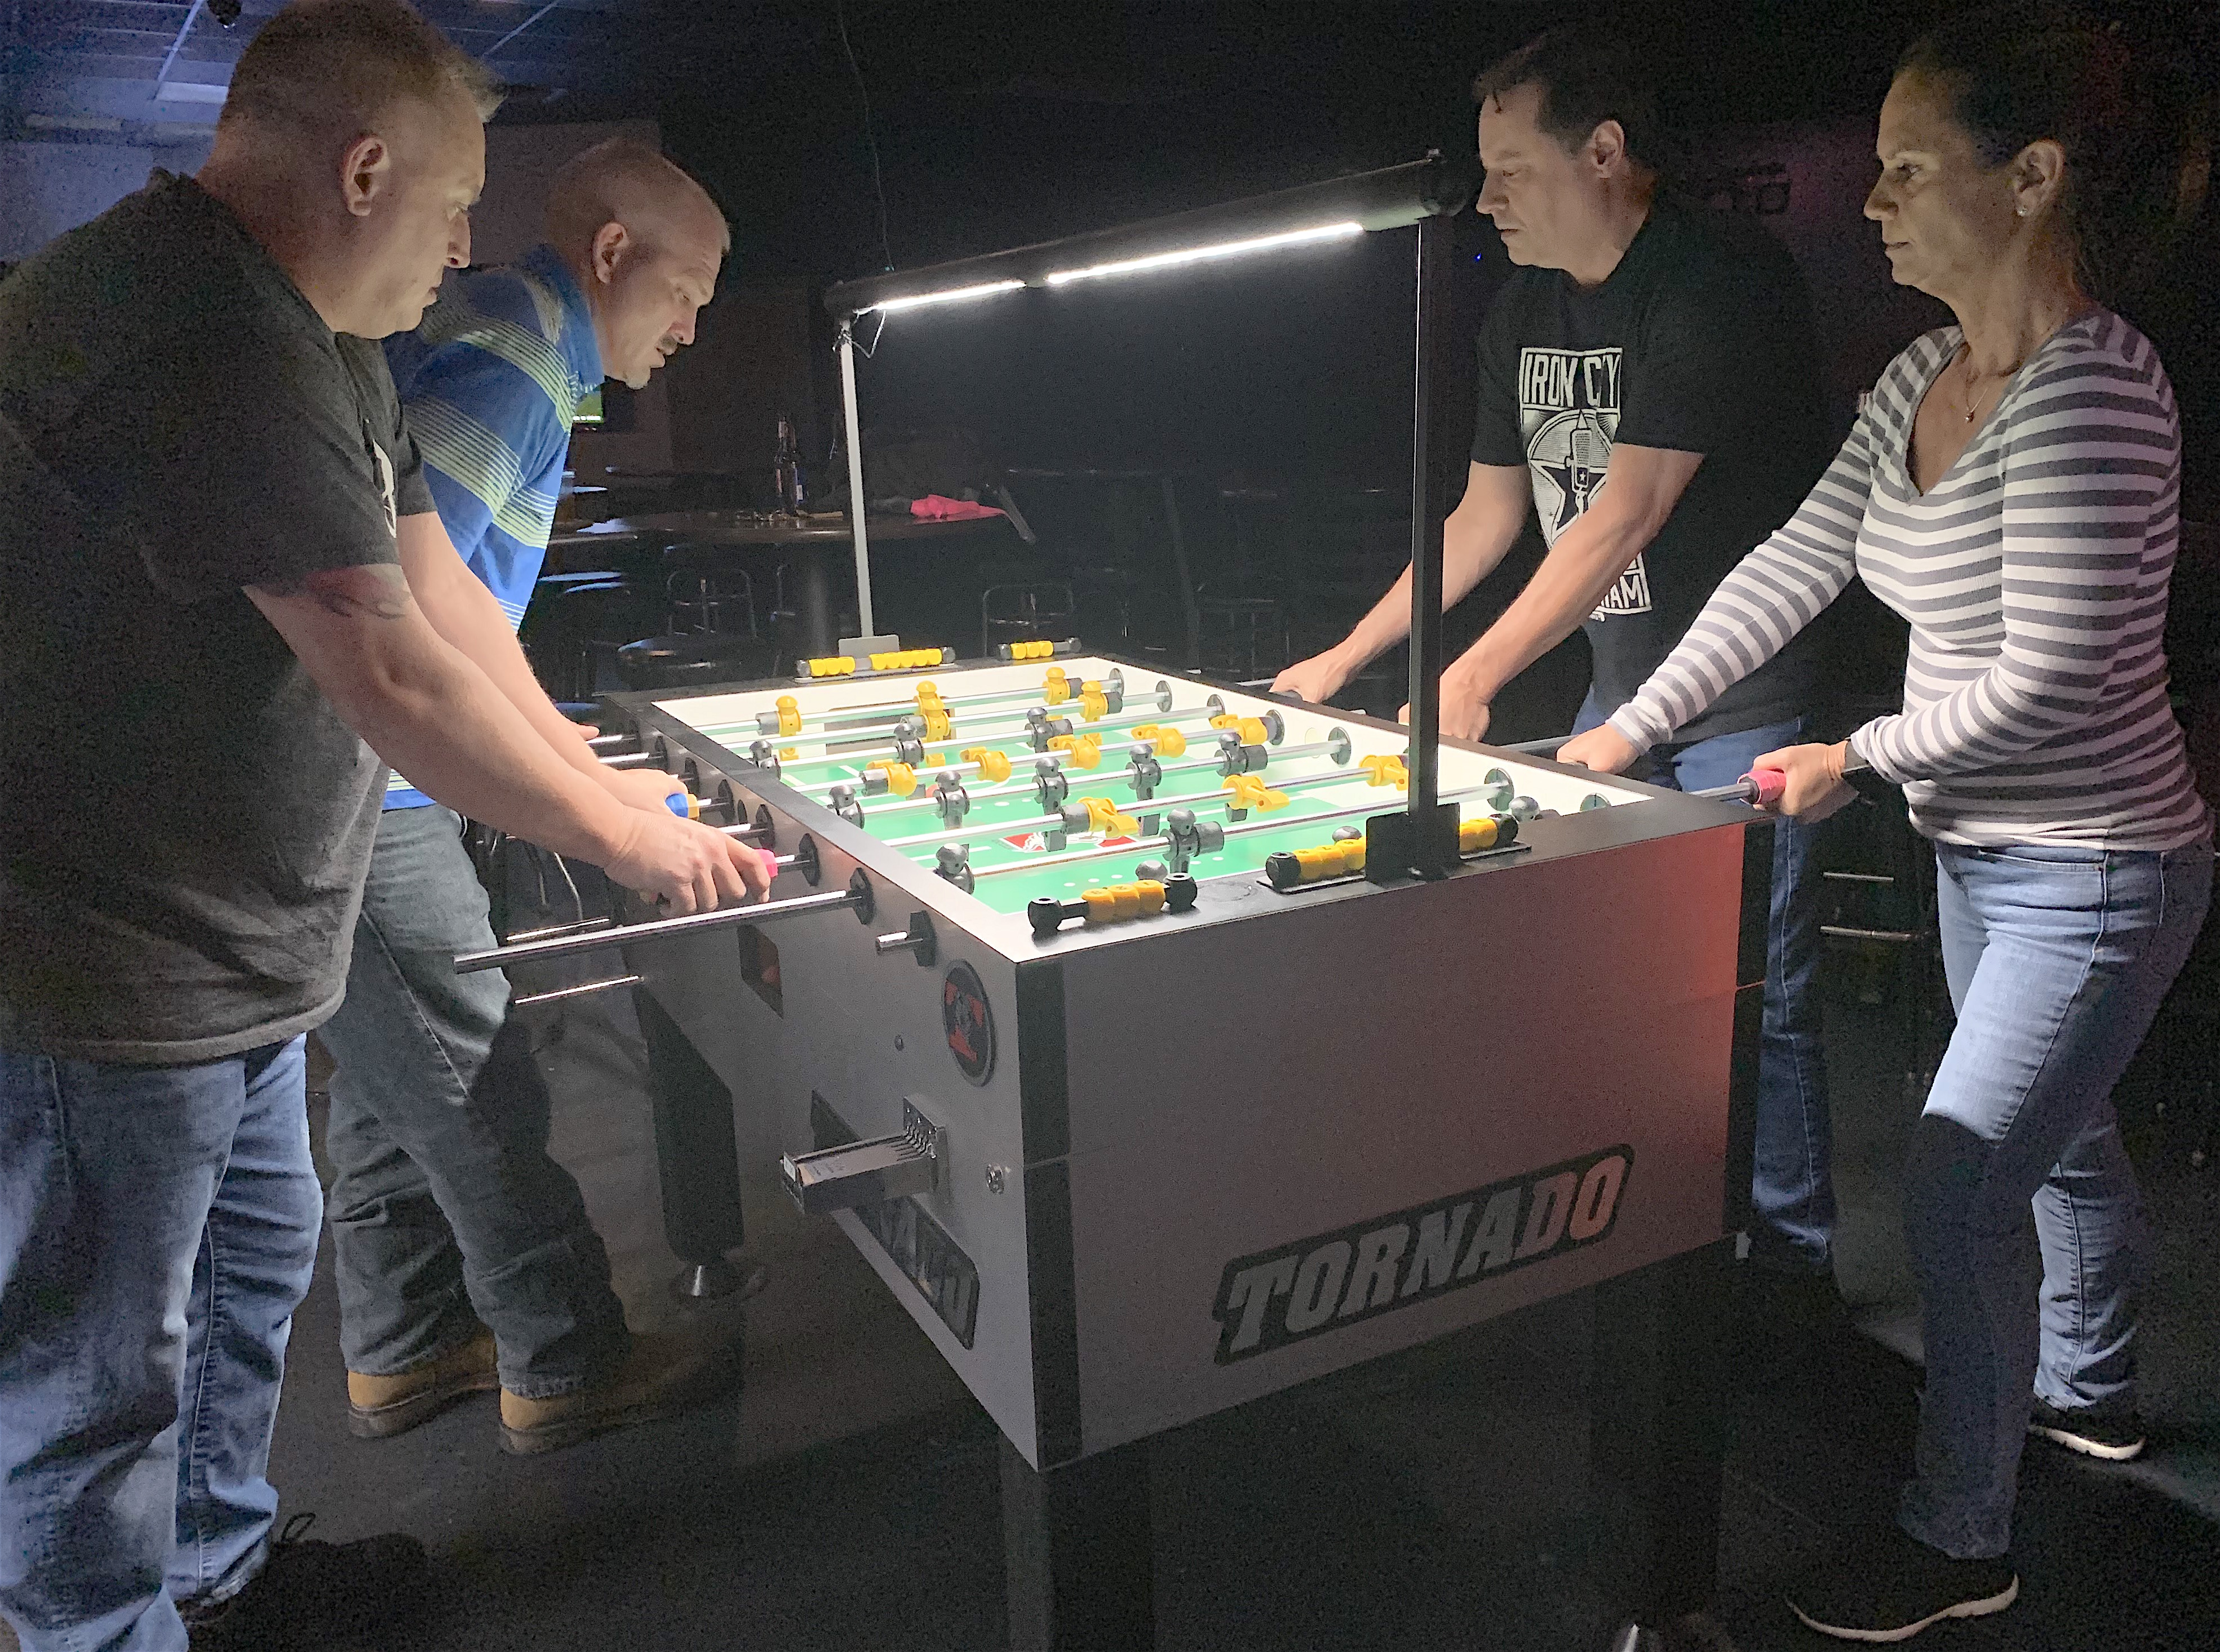 Pictured is Chuck Shikle & Jeremy Monroe vs James Porter & Cheryl Lowe during 2019 foosball tournament action at Madison Station in North Alabama.